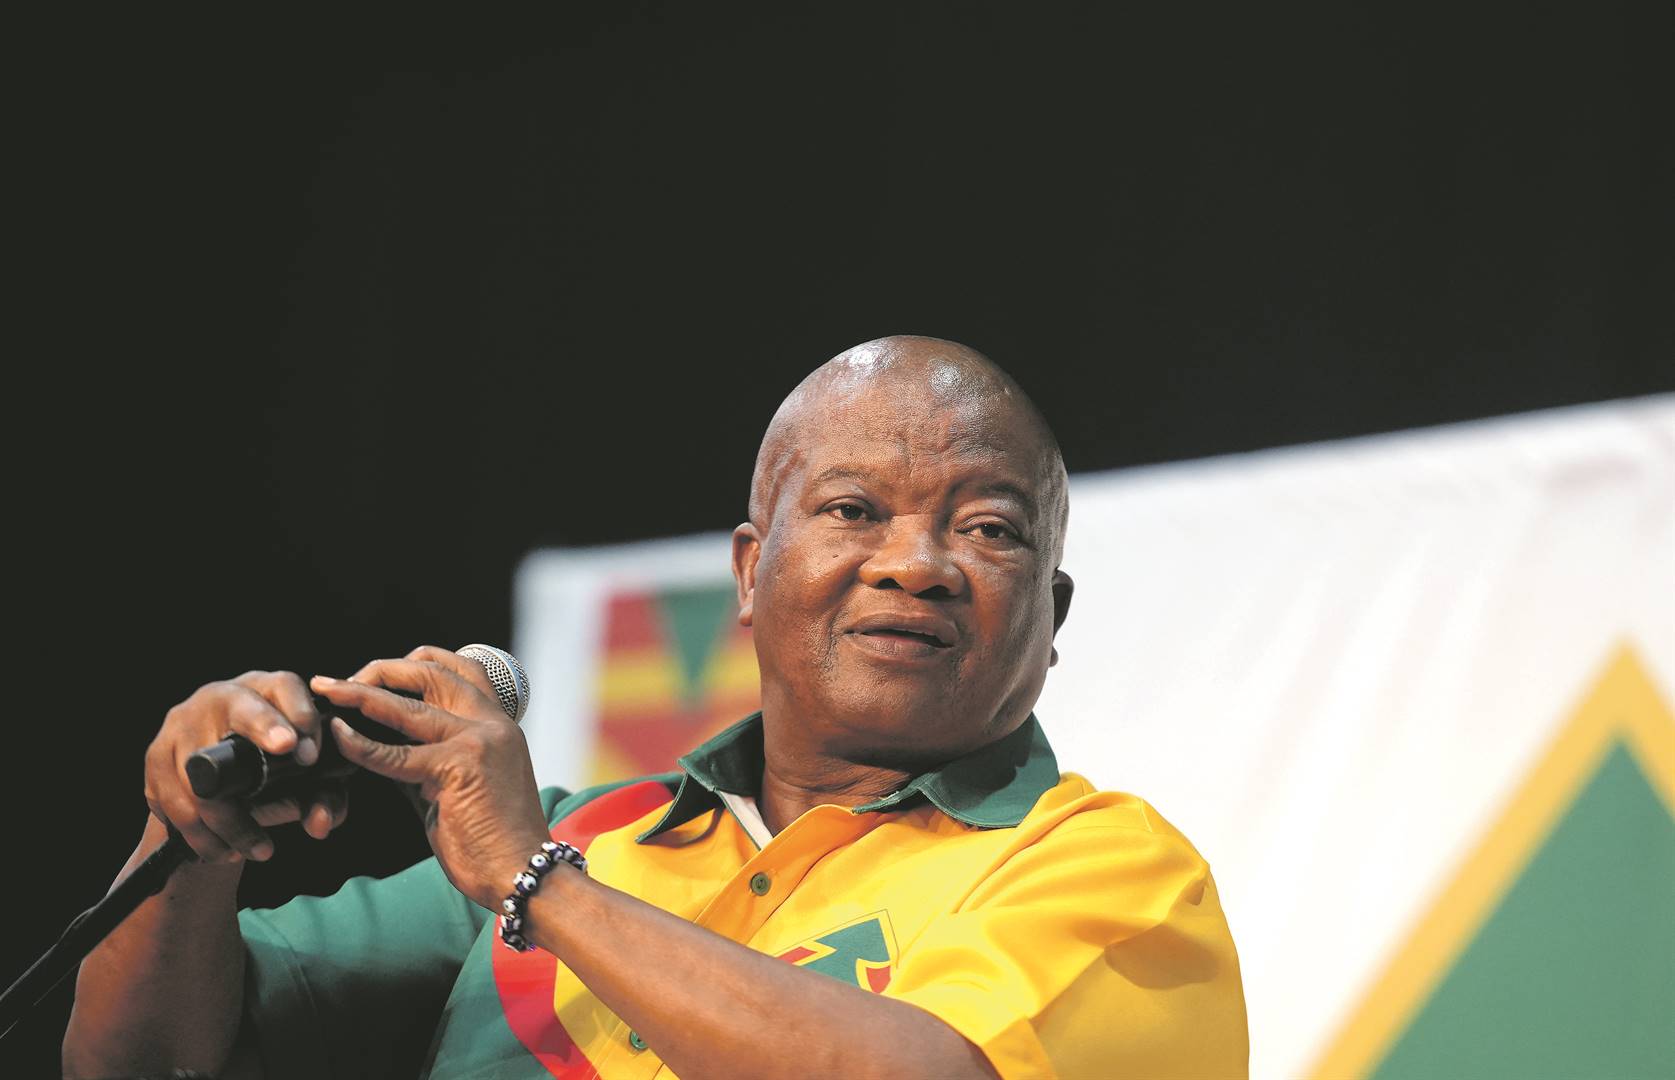 UDM leader Bantu Holomisa says his party will mobilise resources to deal with crime in the country 